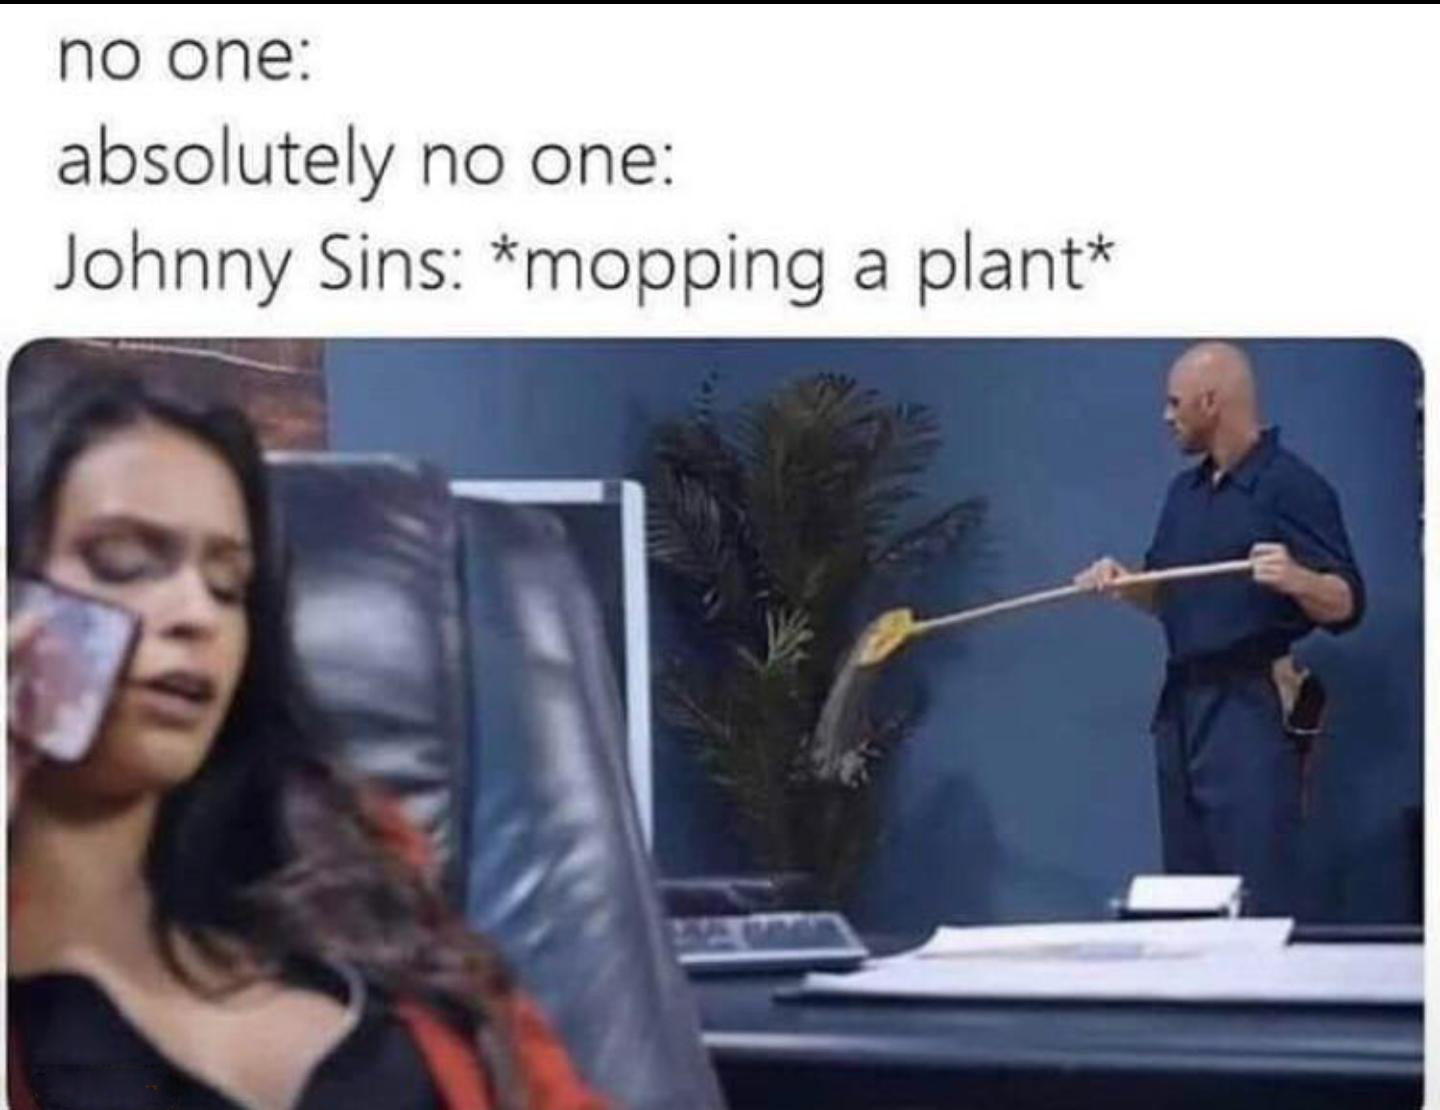 dank memes and funny pics - presentation - no one absolutely no one Johnny Sins mopping a plant